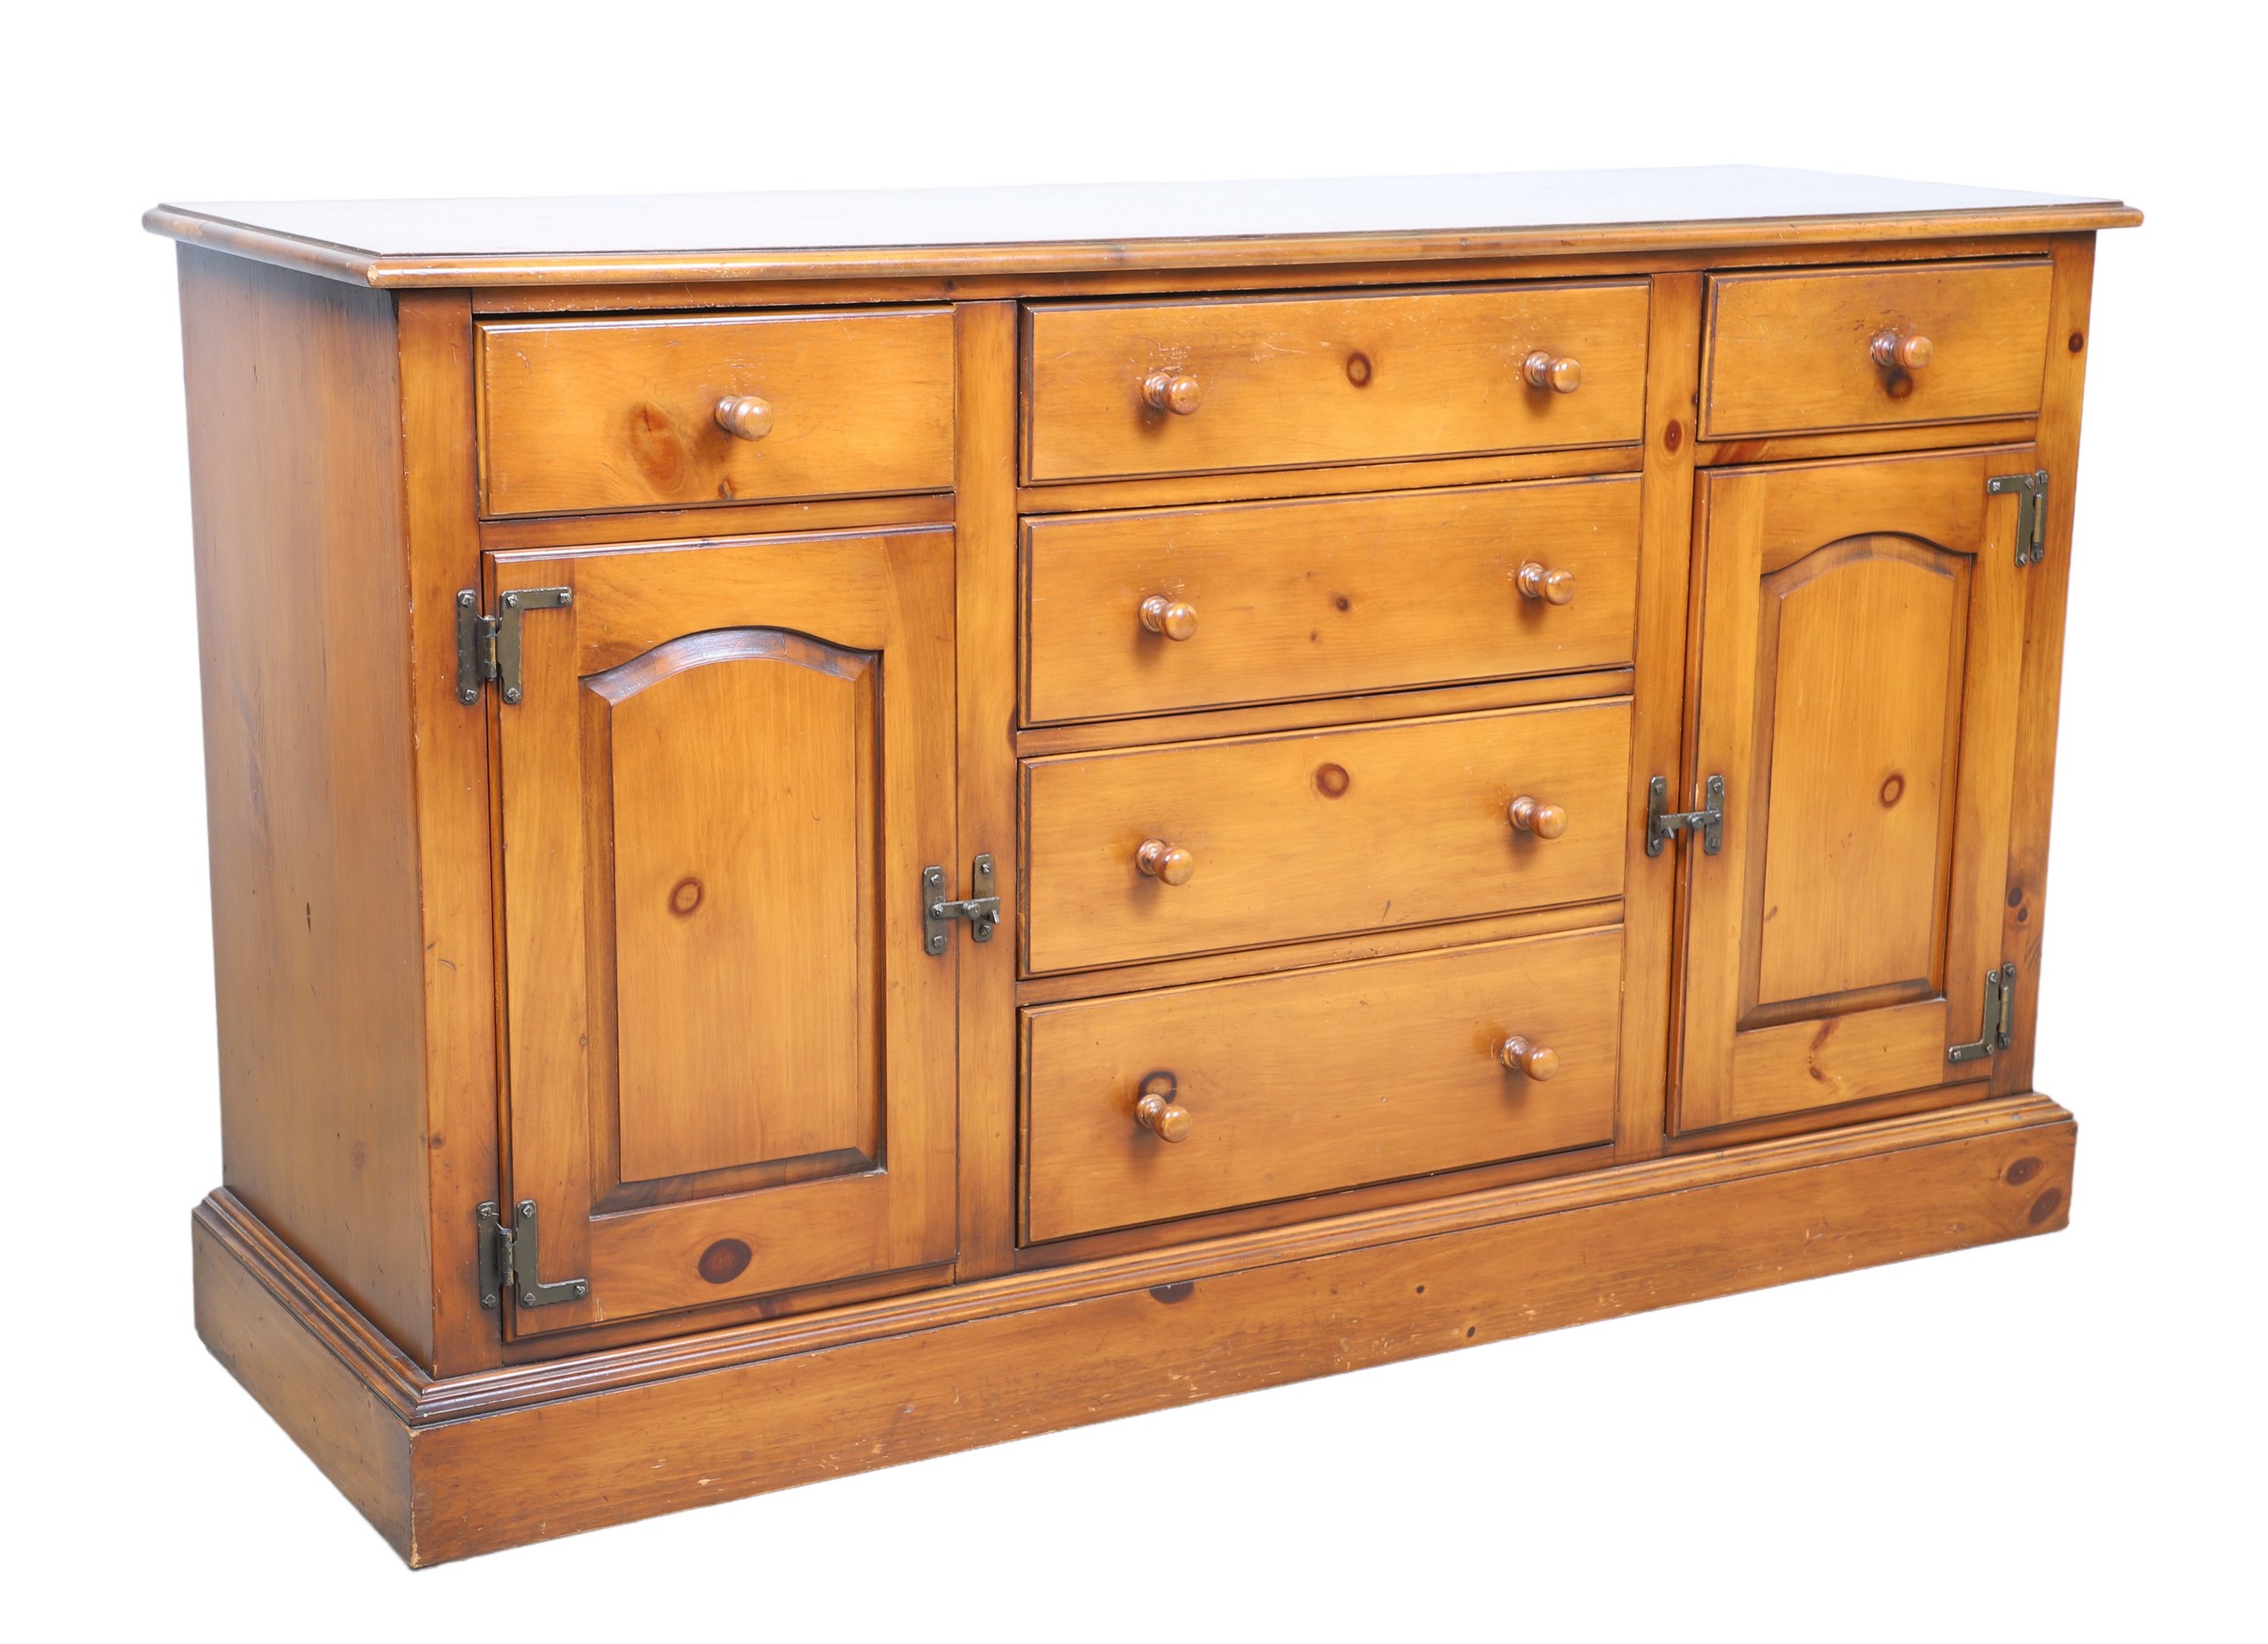 Drexel Pine chest of drawers, 4 drawers